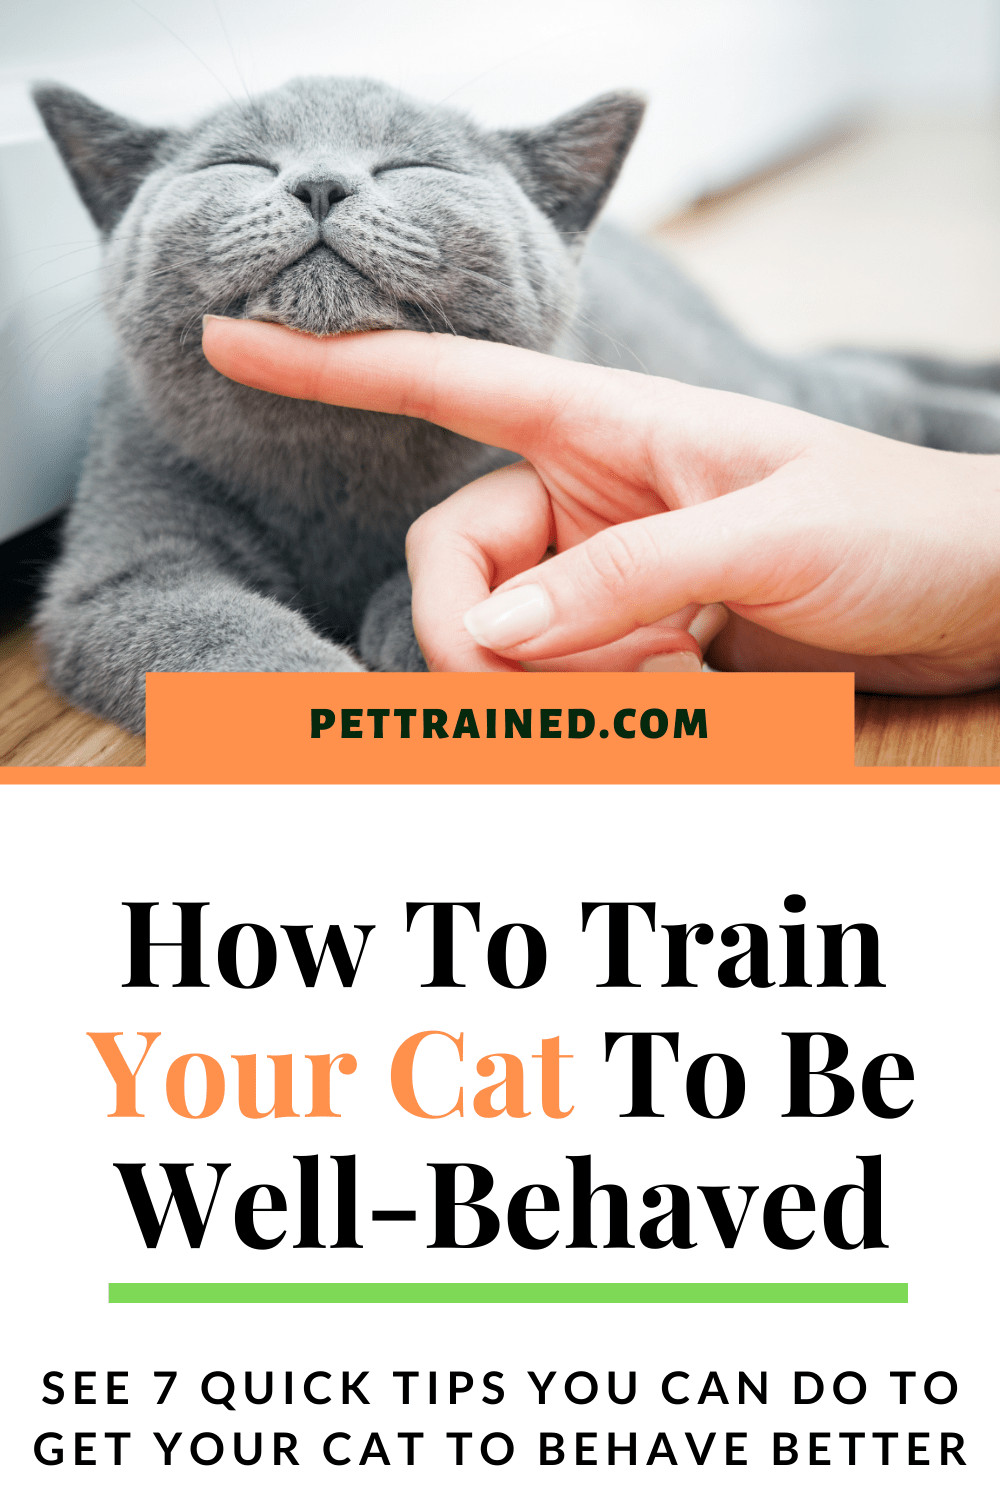 Train a cat to behave well